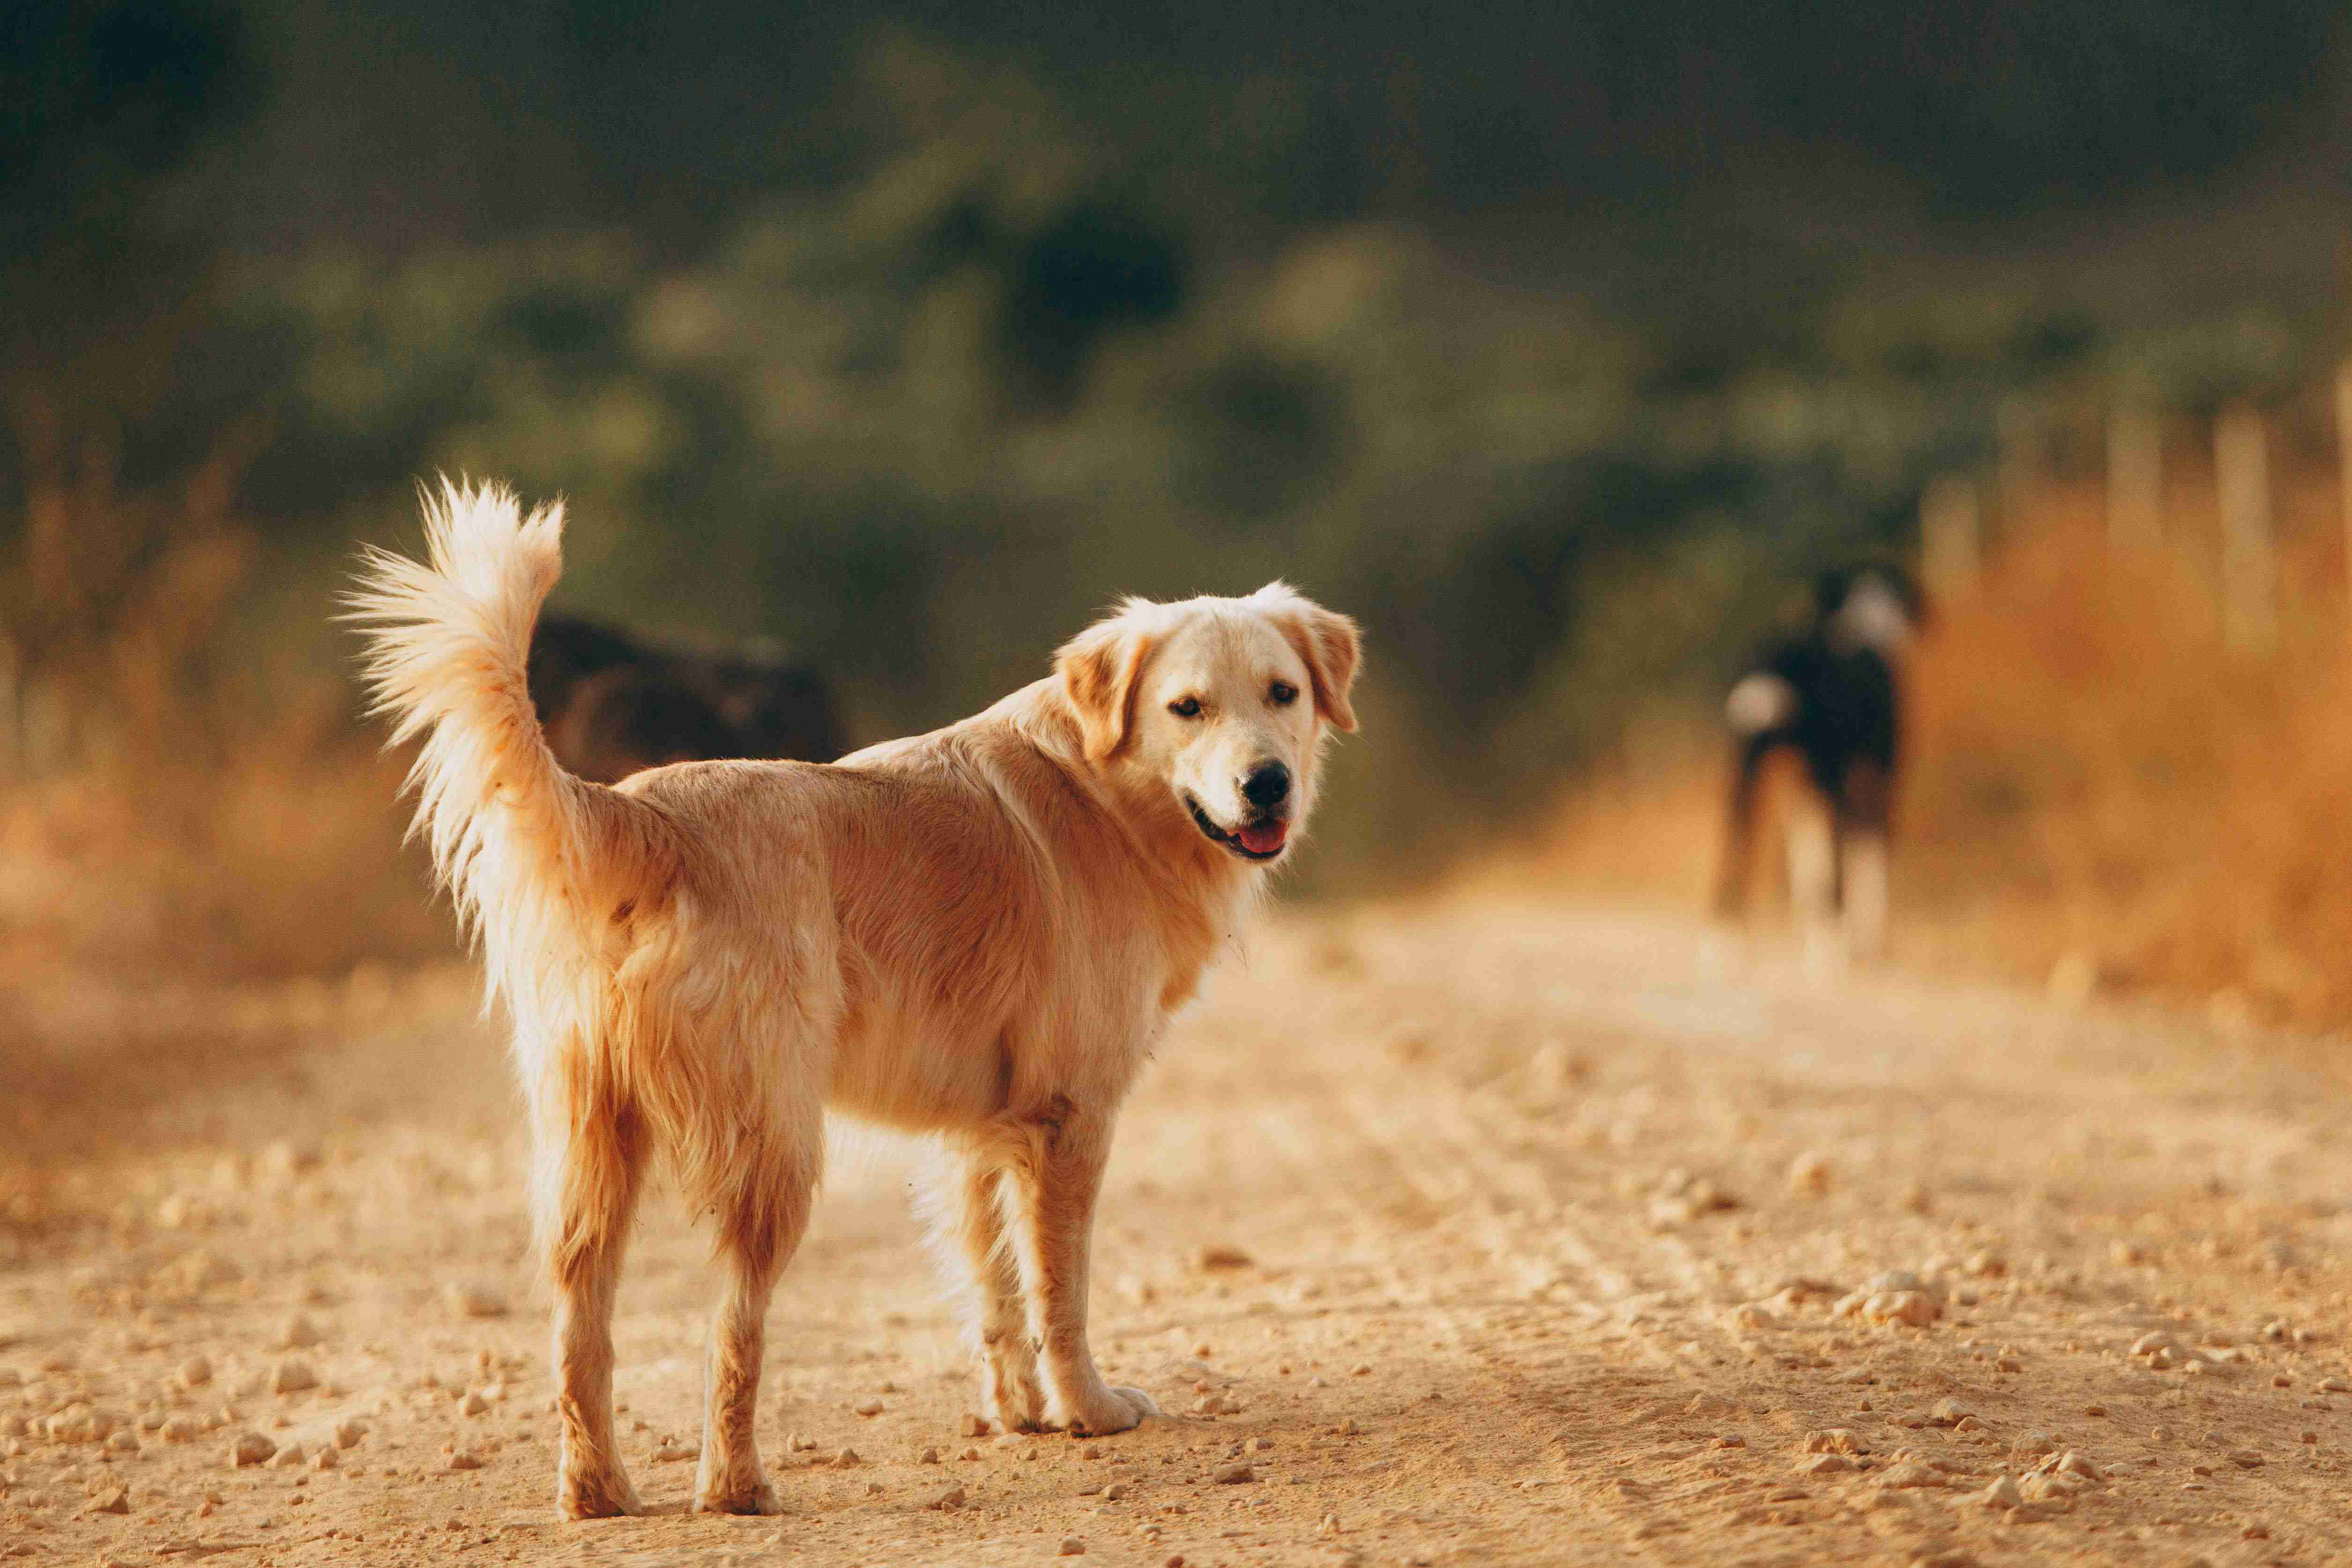 What are some signs of dental disease in golden retrievers?